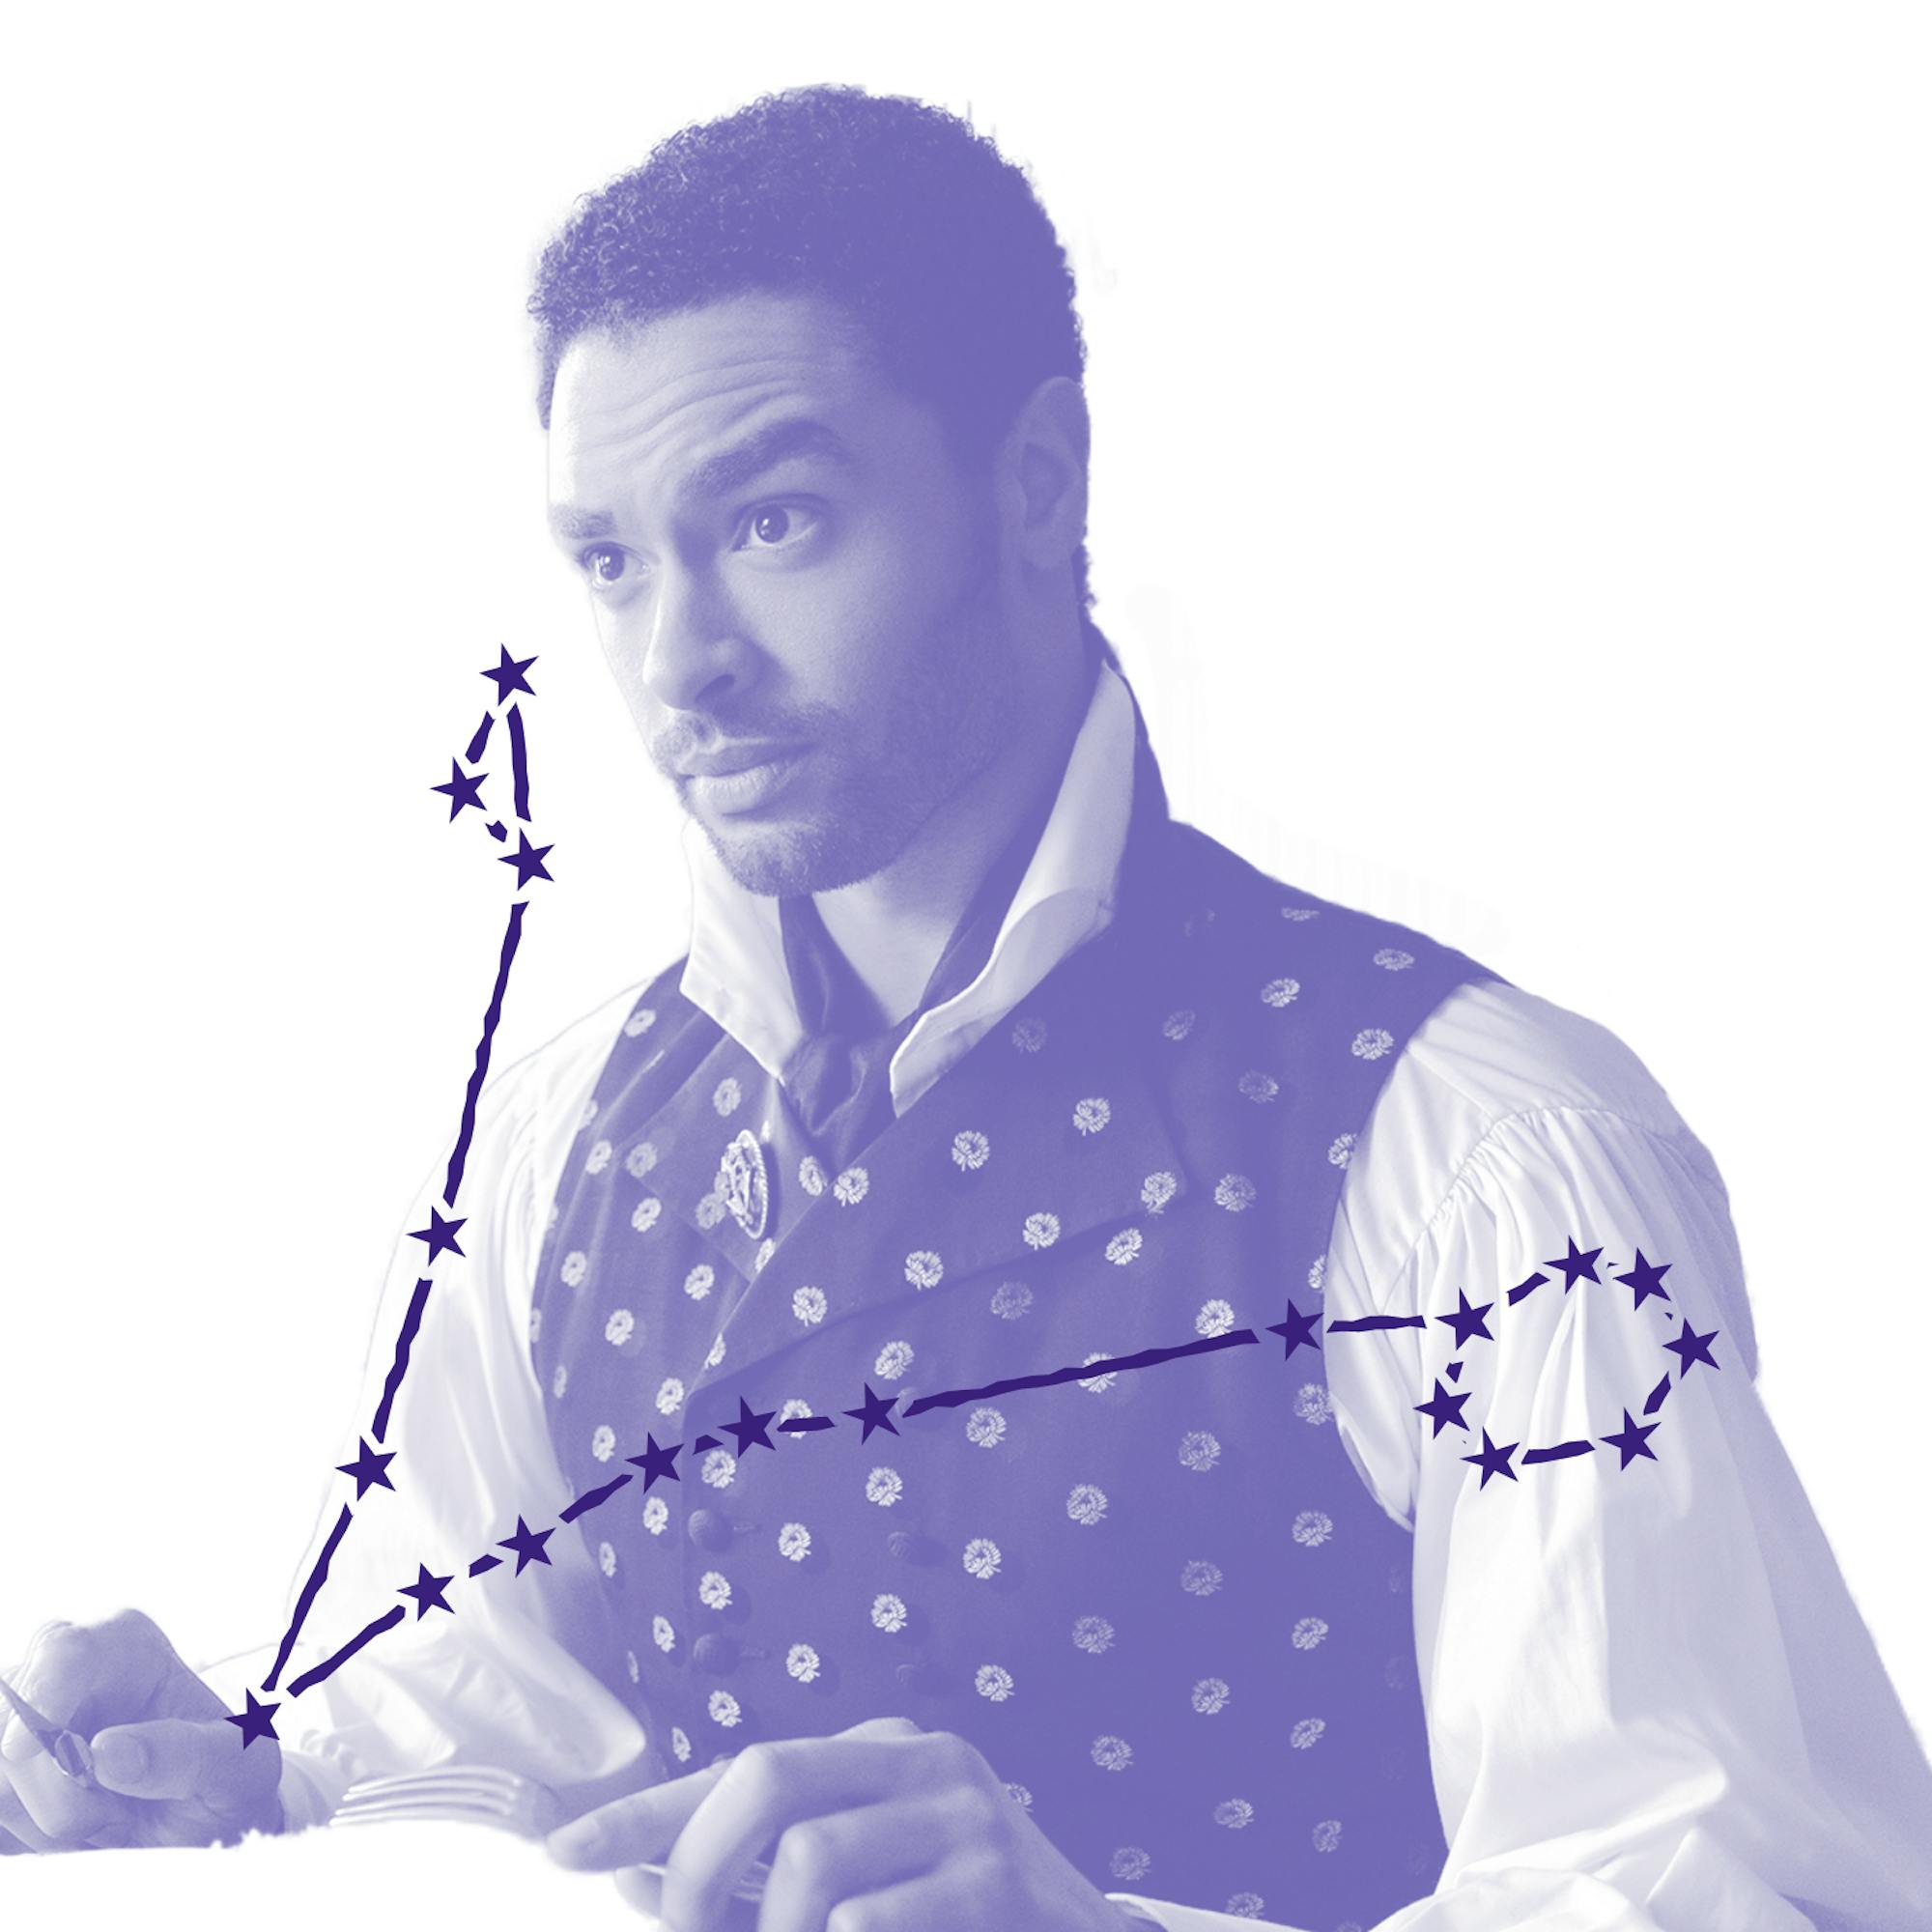 Simon Baset (played by Regé-Jean Page) wears an impenetrable expression that far overshadows his heavily patterned vest and puff-sleeved shirt. Over the image is an illustration of Simon’s zodiac constellation.